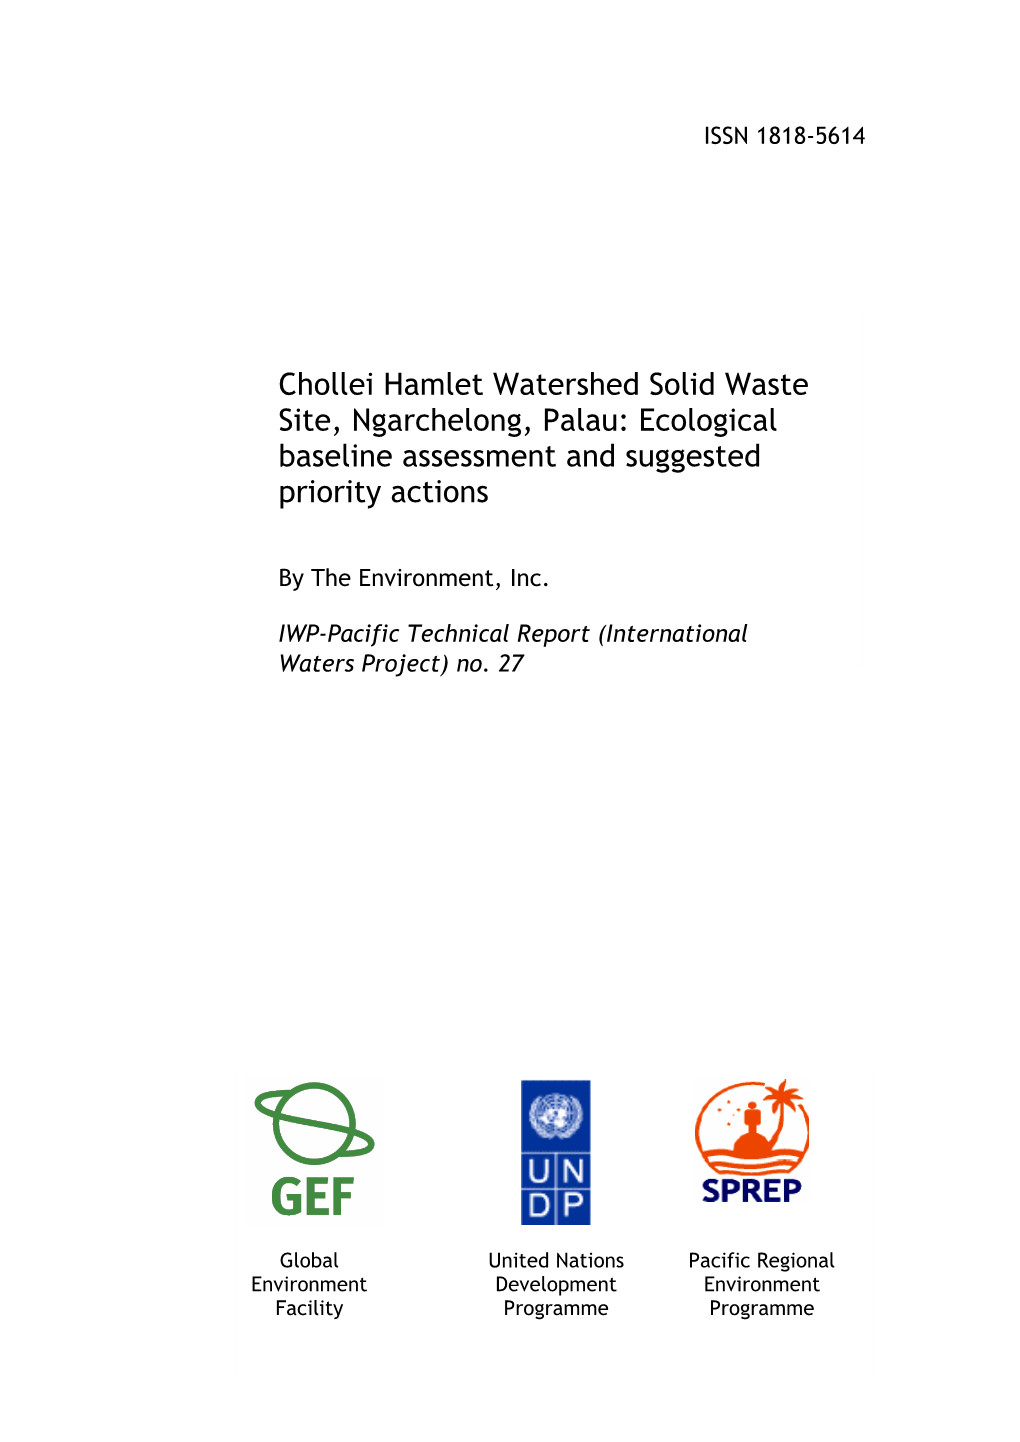 Chollei Hamlet Watershed Solid Waste Site, Ngarchelong, Palau: Ecological Baseline Assessment and Suggested Priority Actions